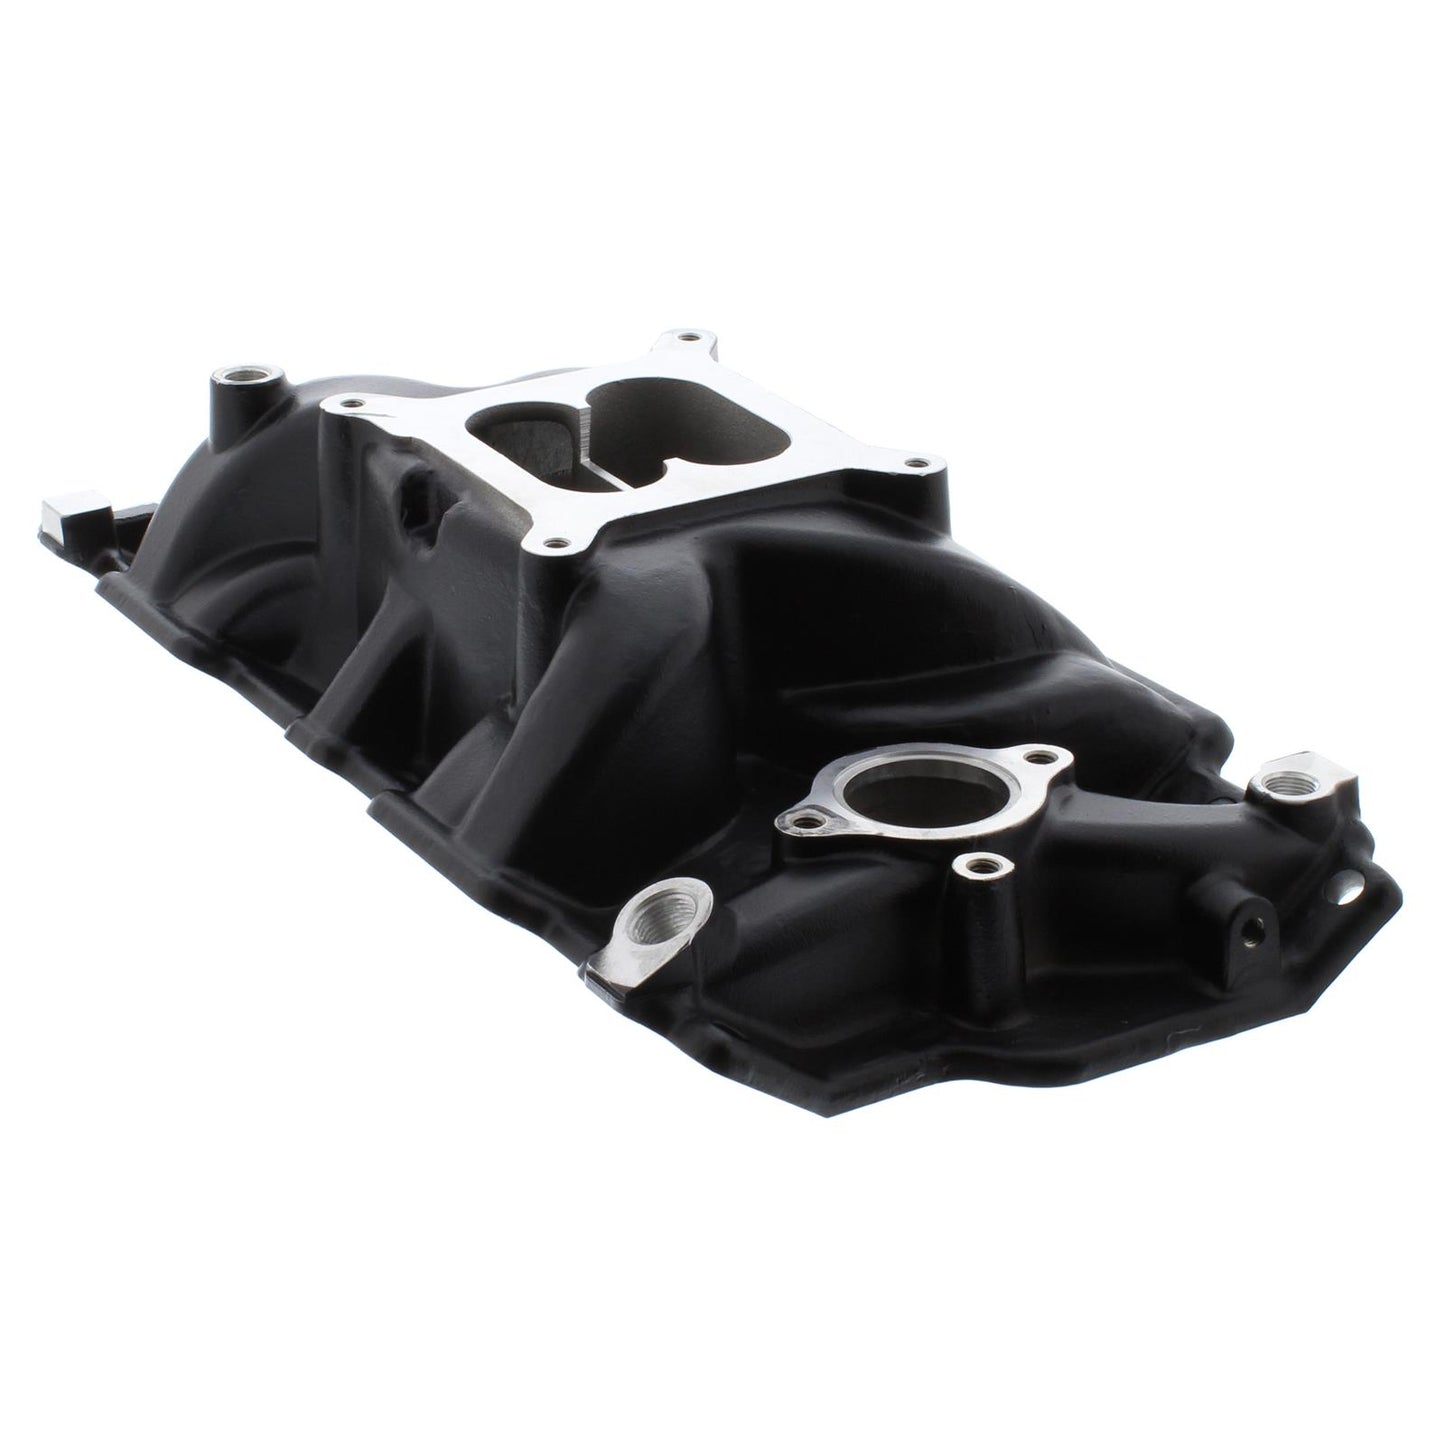 52043 -  Small Block Chevy V8 Typhoon Intake Manifold BLACK - Professional Products